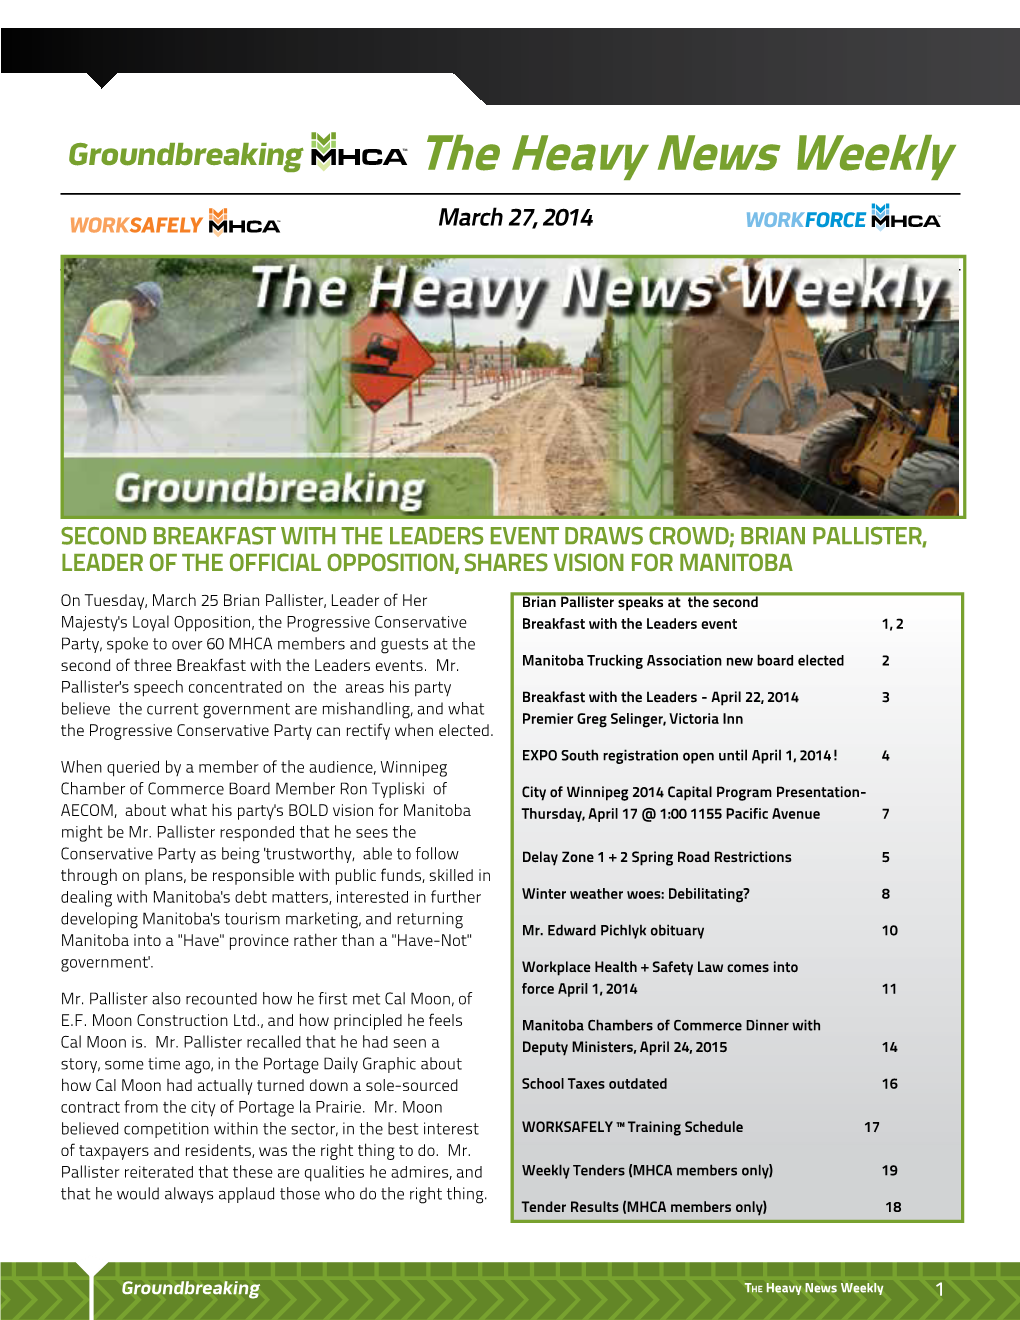 The Heavy News Weekly March 27, 2014